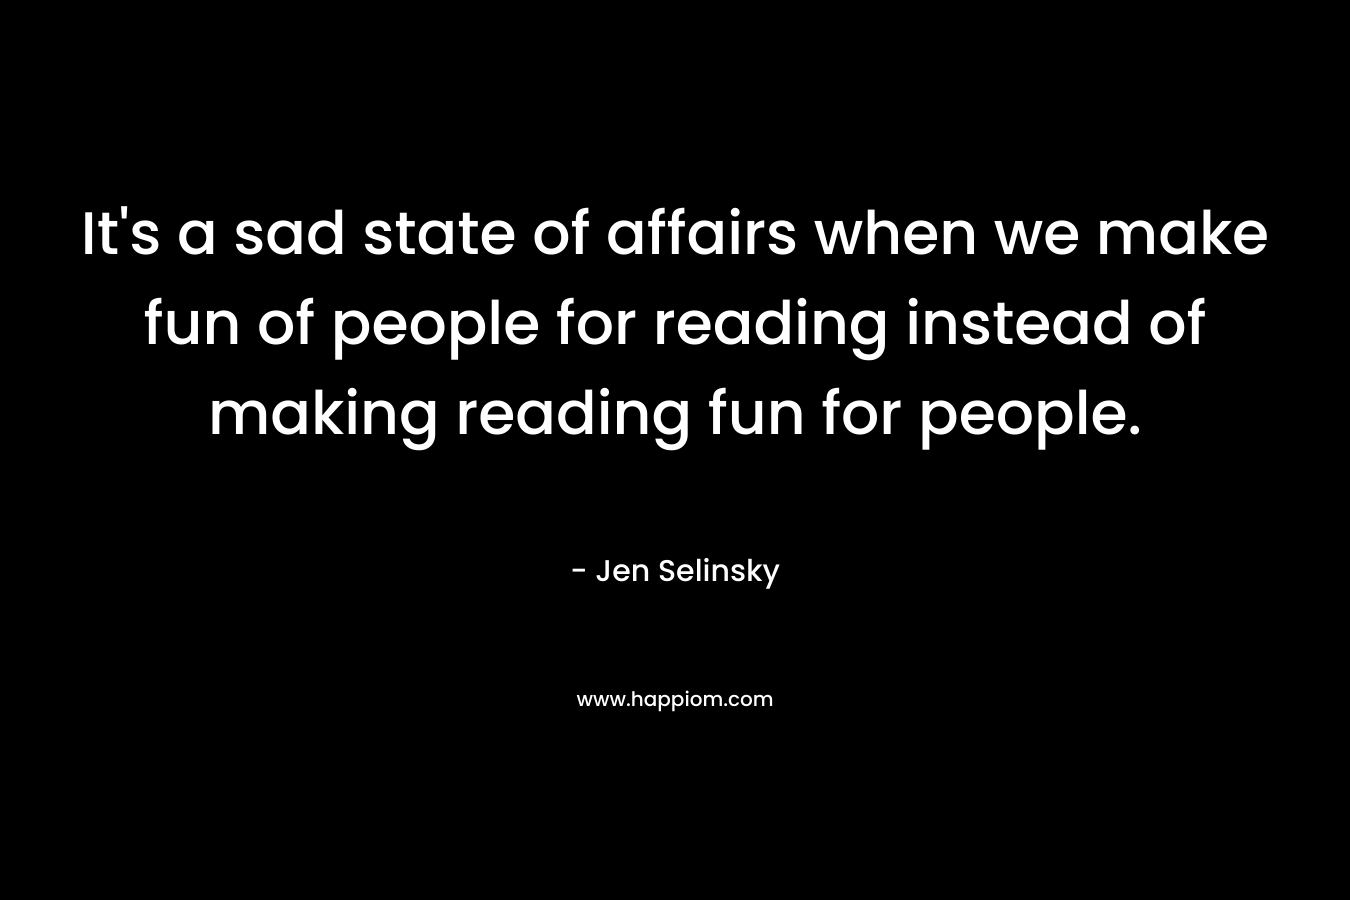 It’s a sad state of affairs when we make fun of people for reading instead of making reading fun for people. – Jen Selinsky